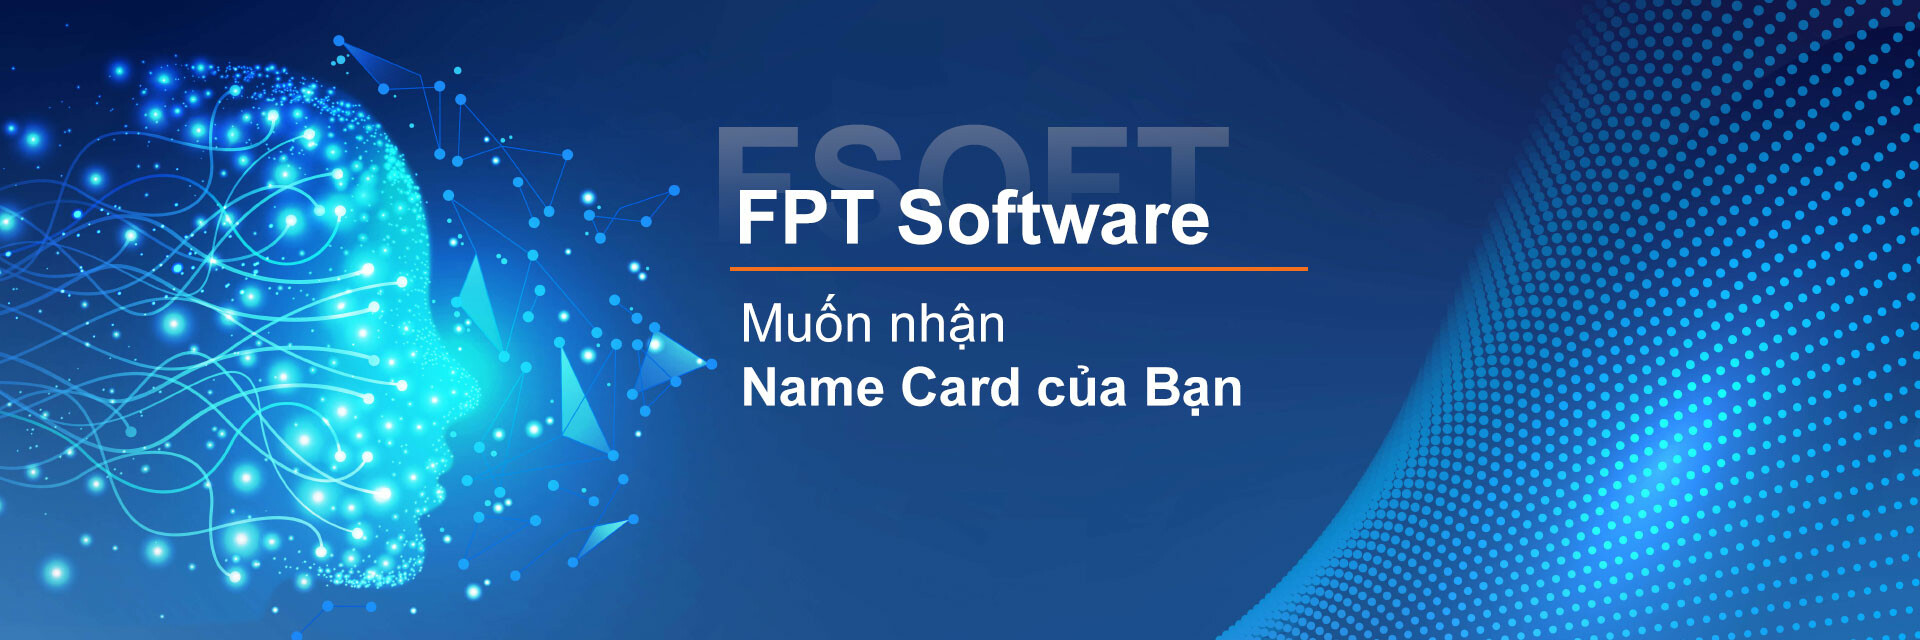 Cover image for FPT Software